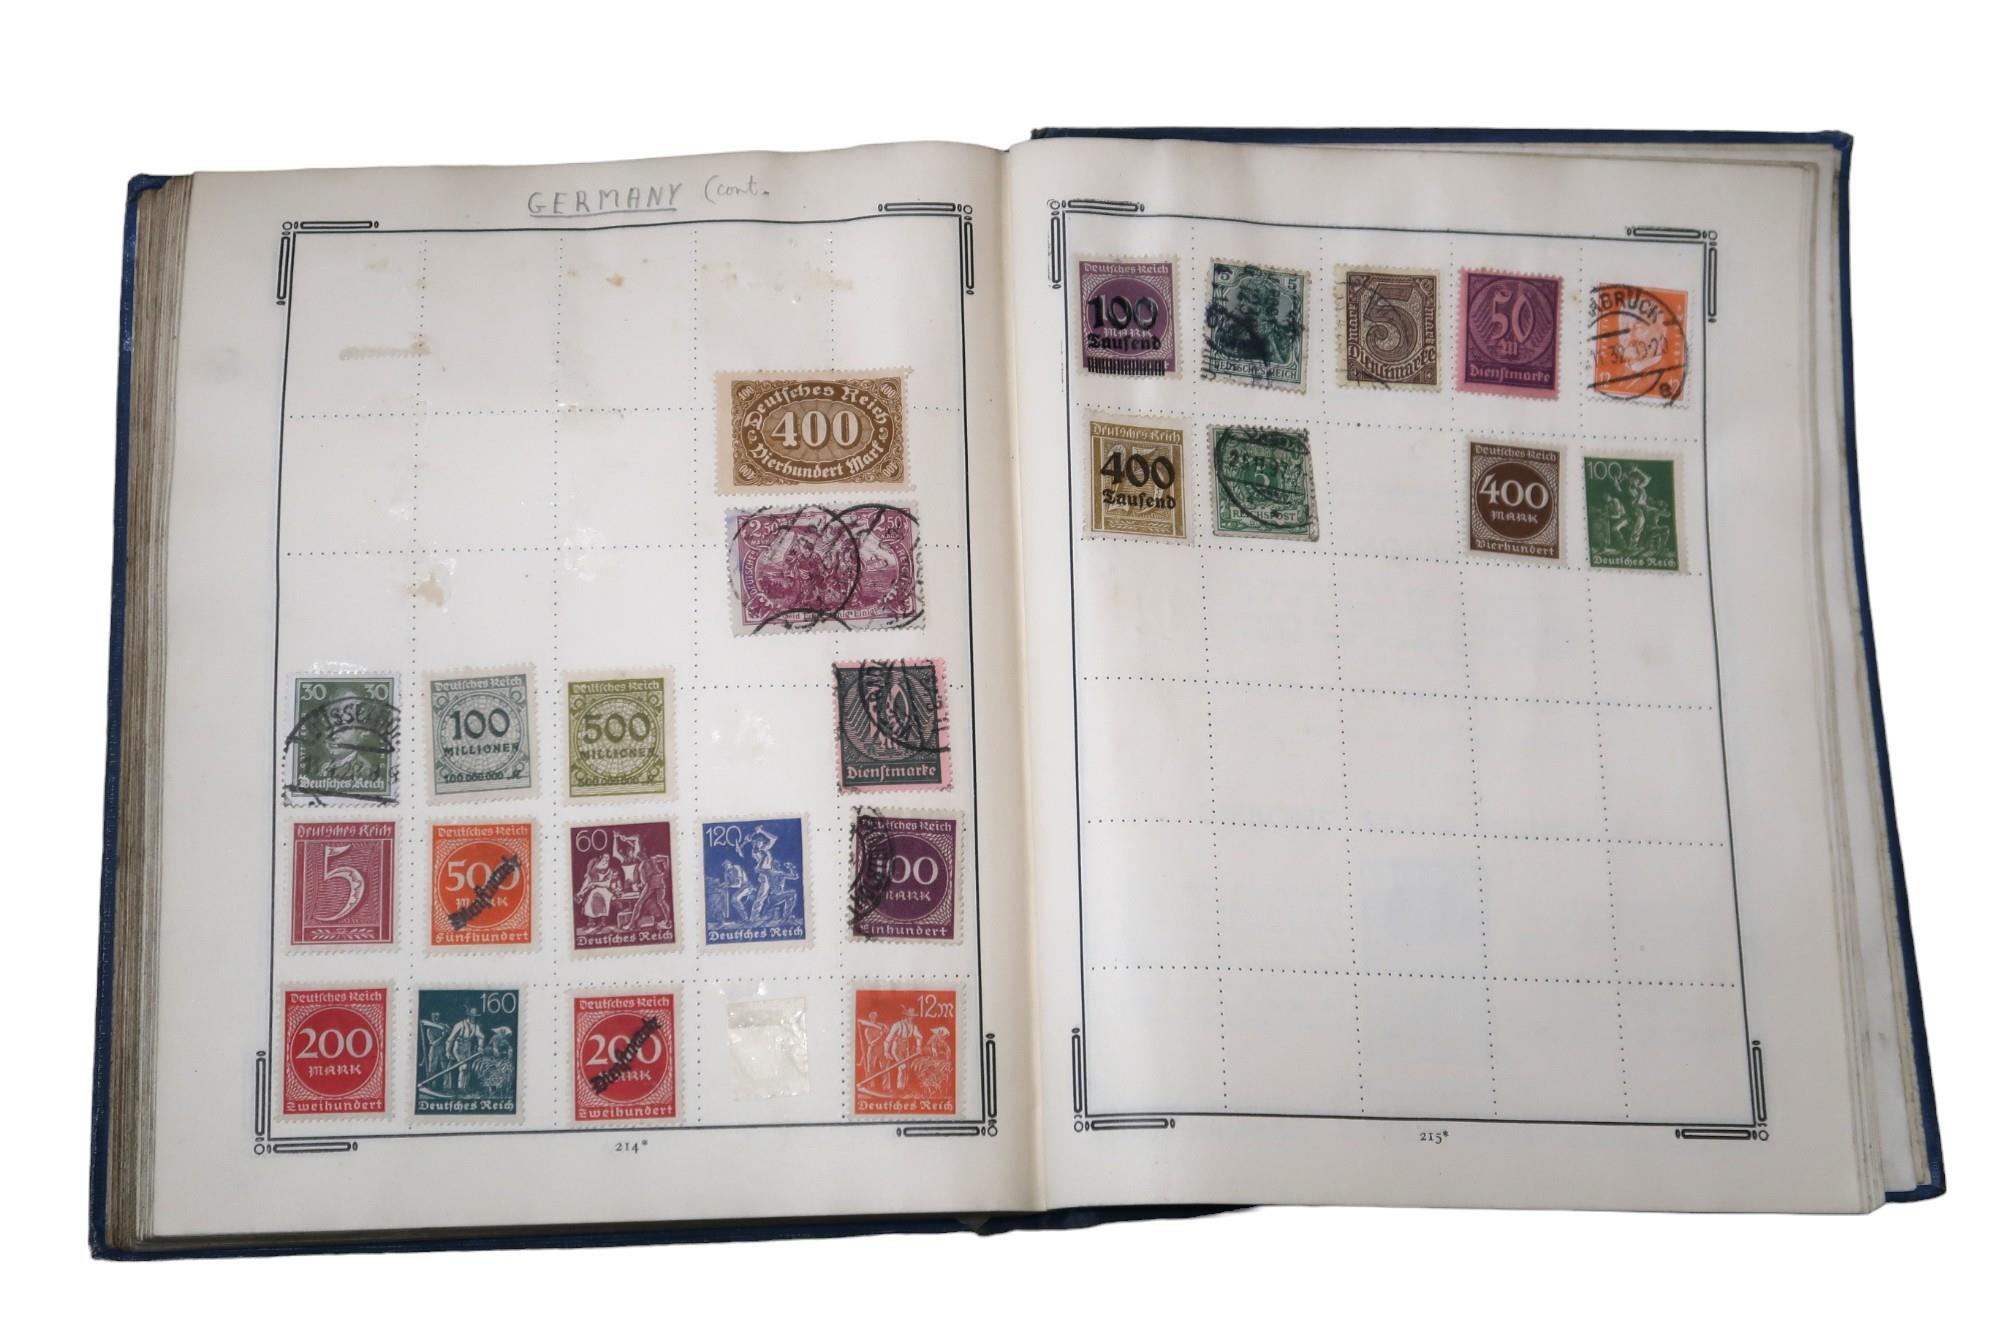 Stanley Gibbons The Improved Stamp Album to include Great Britain 1/d red, 1/d lilac, Victoria 1/ - Image 2 of 20